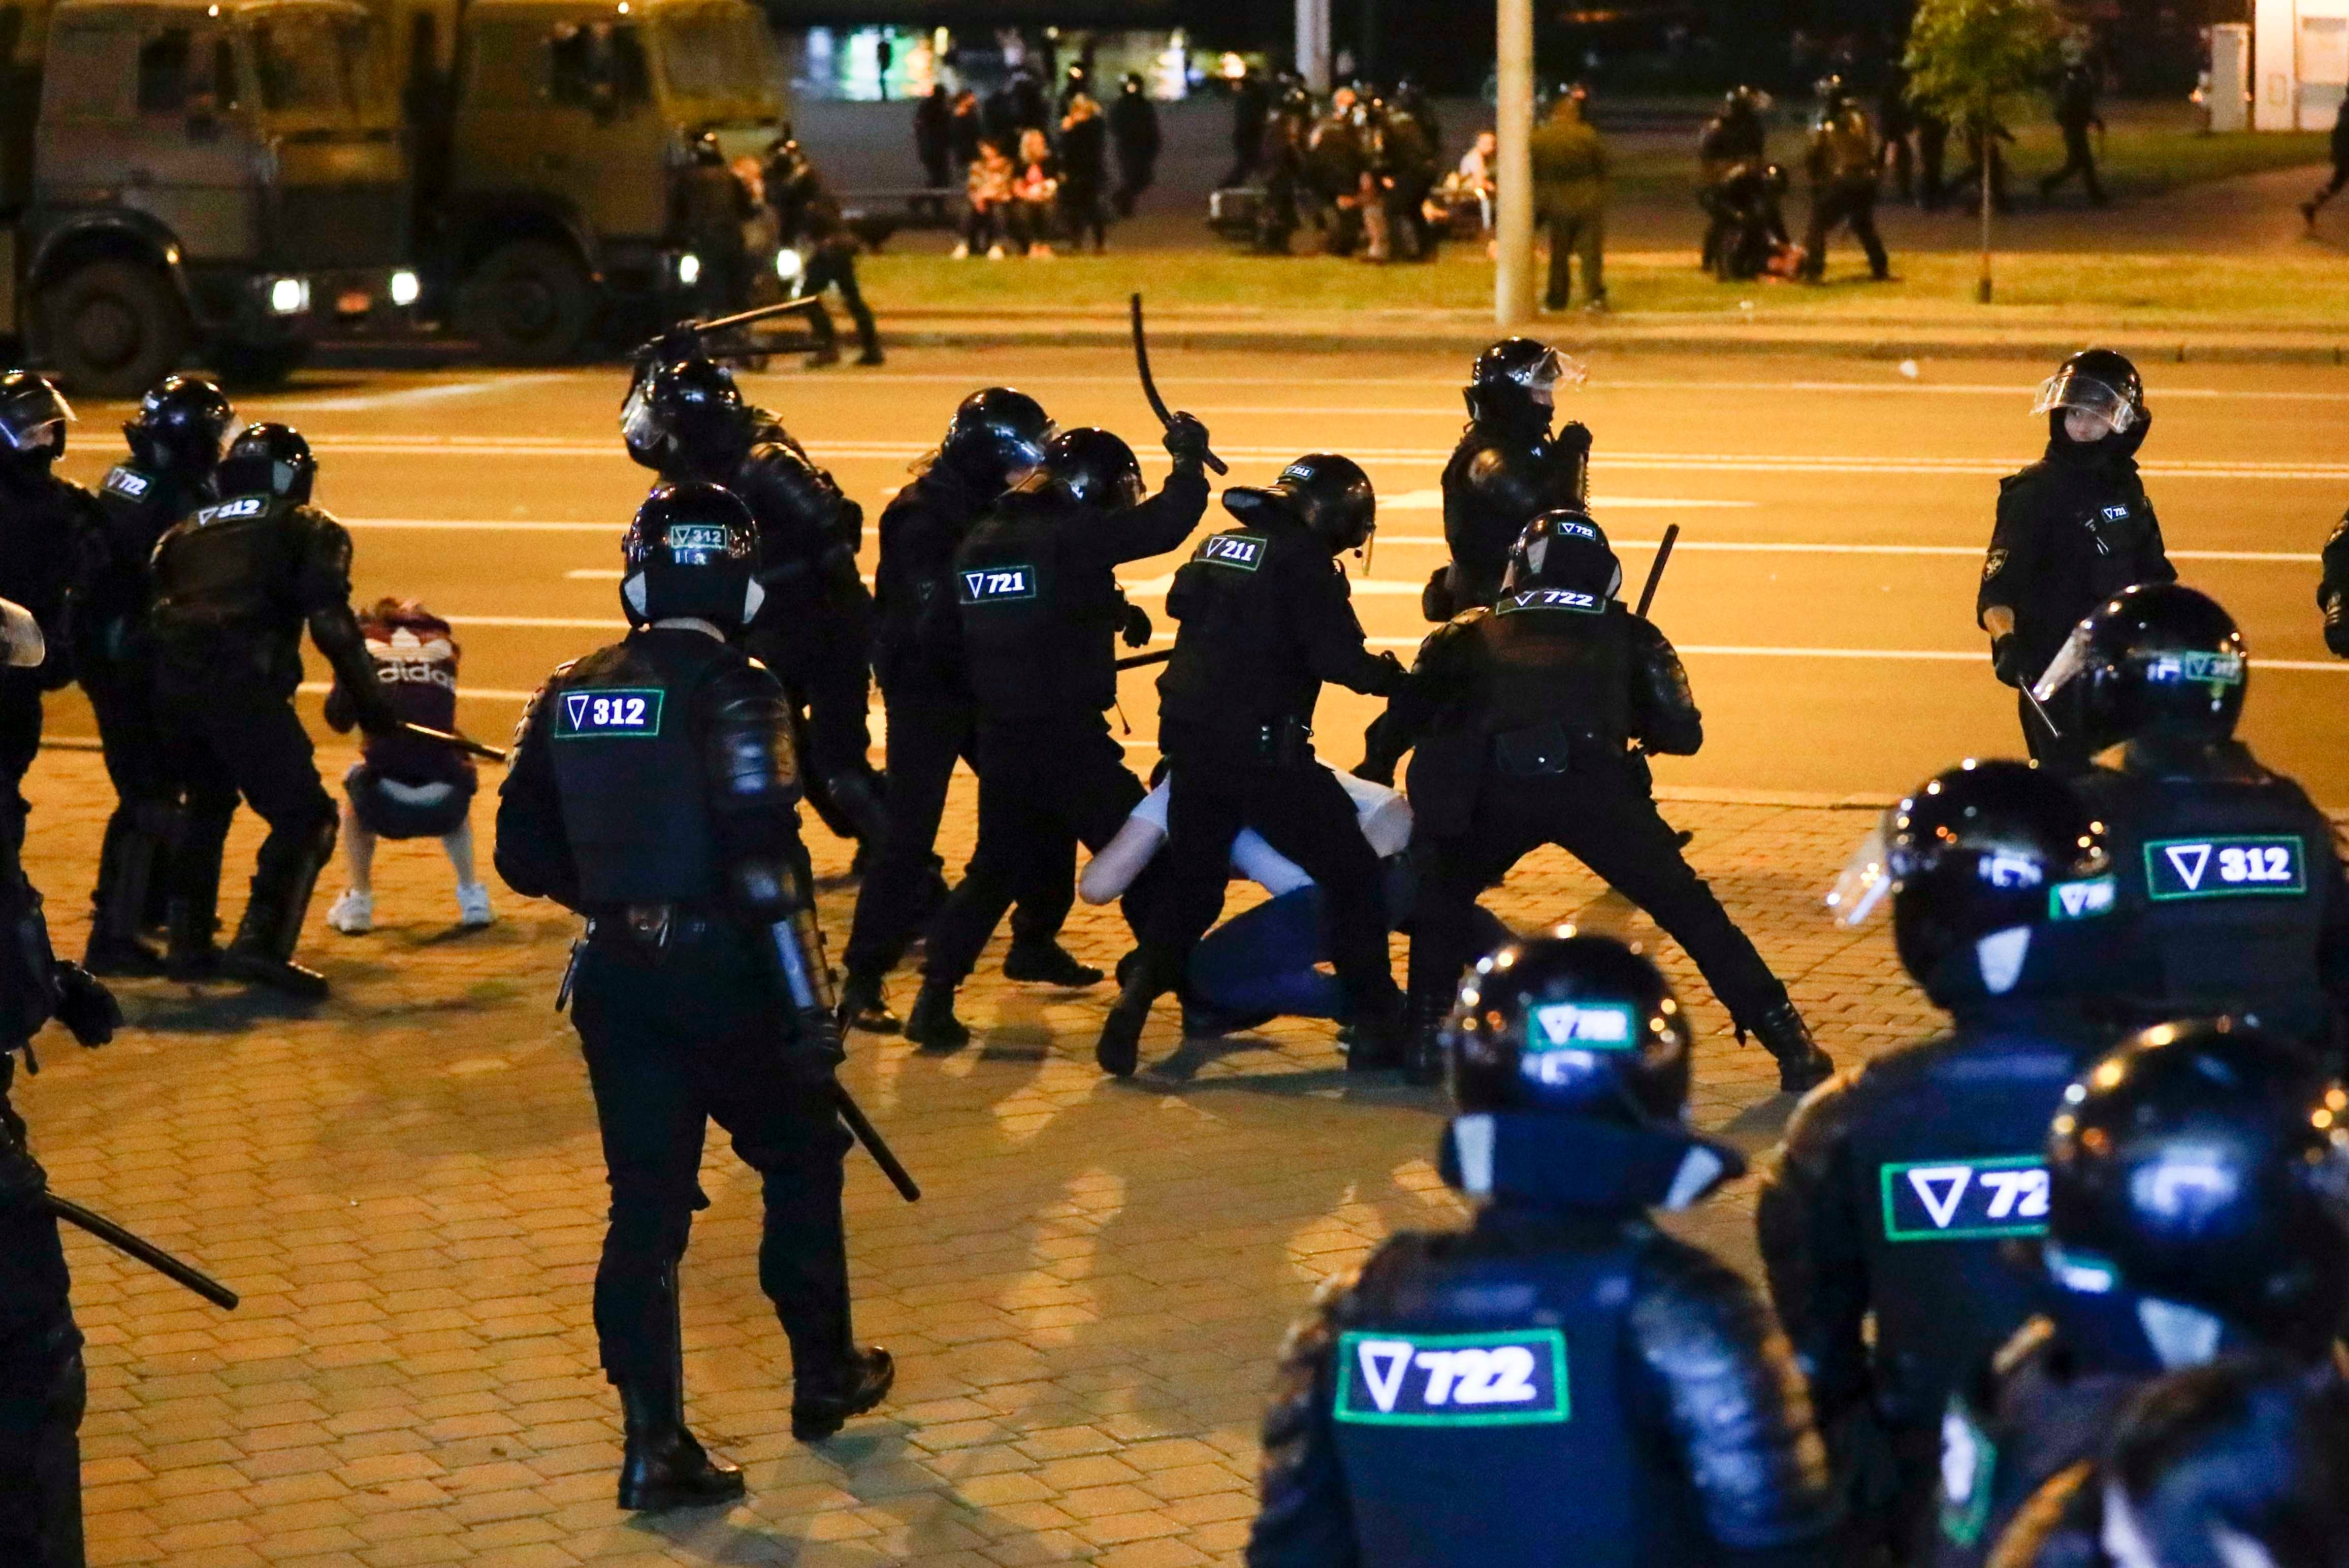 Police use truncheons on protesters on Monday, August 10, 2020, during the second straight night when thousands protested in Minsk, Belarus after official results from weekend elections gave an overwhelming victory to authoritarian President Alexander Lukashenko, extending his 26-year rule. 